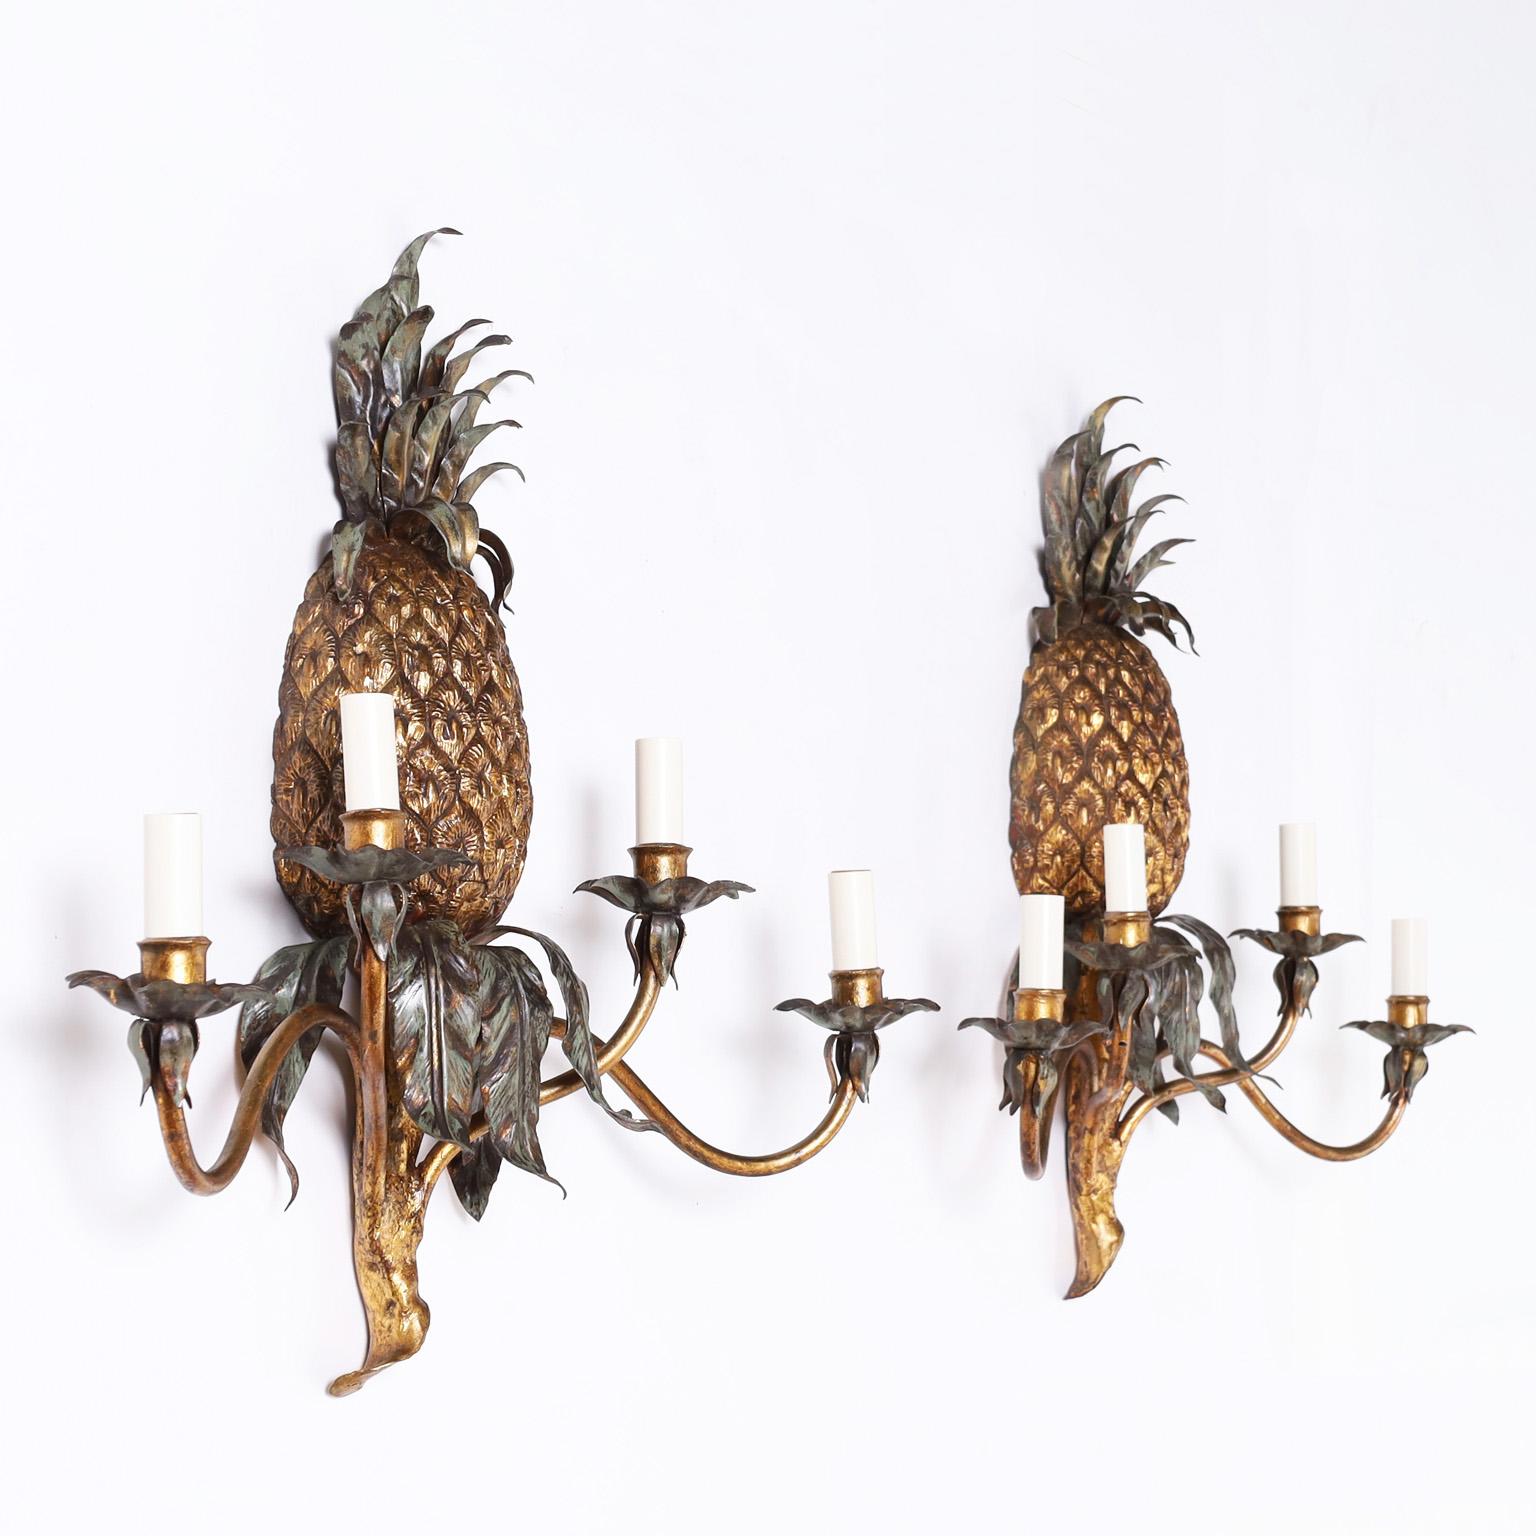 Pair of Italian vintage tole or painted metal wall sconces having pineapples over four graceful arms with floral bobeches.